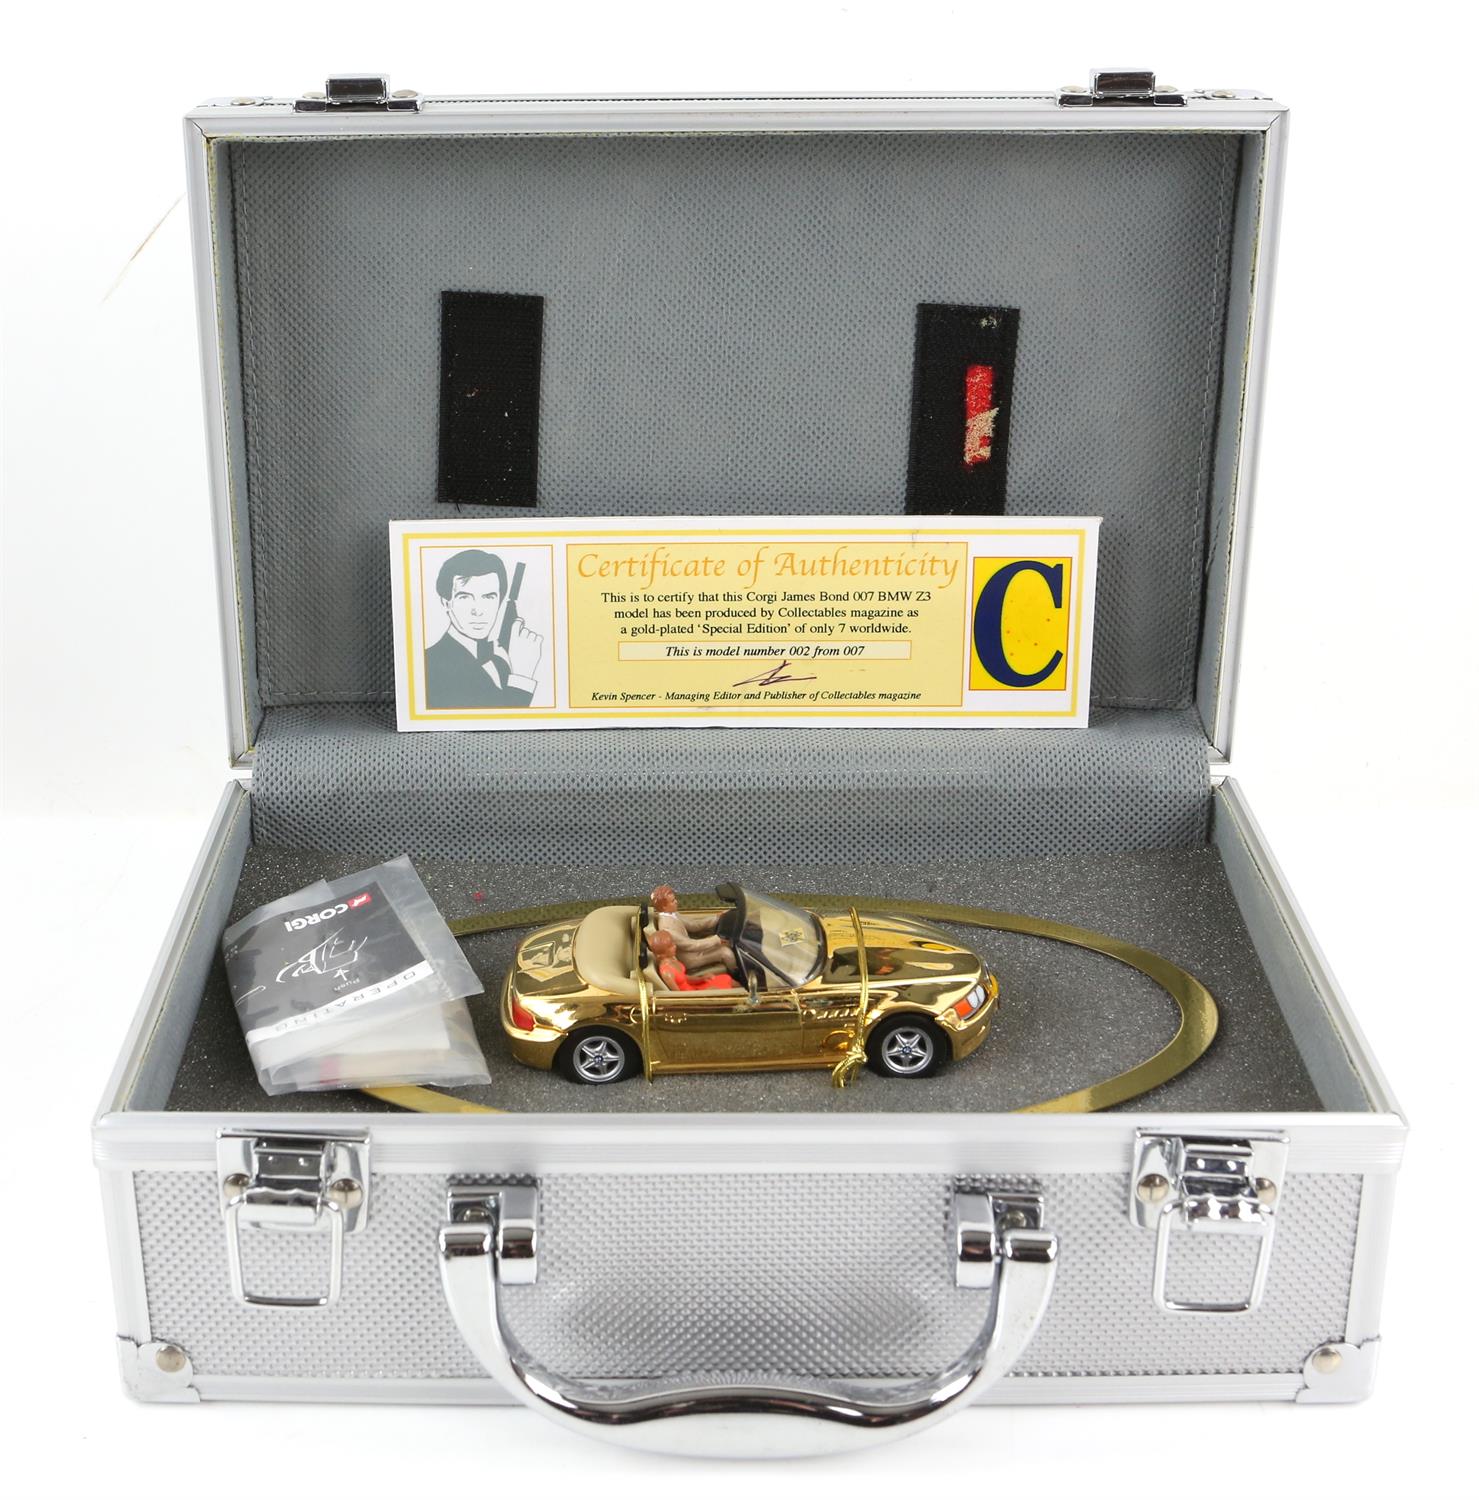 James Bond - 11 Corgi James Bond 007 gold plated 'Special Edition' diecast models produced by - Image 8 of 14